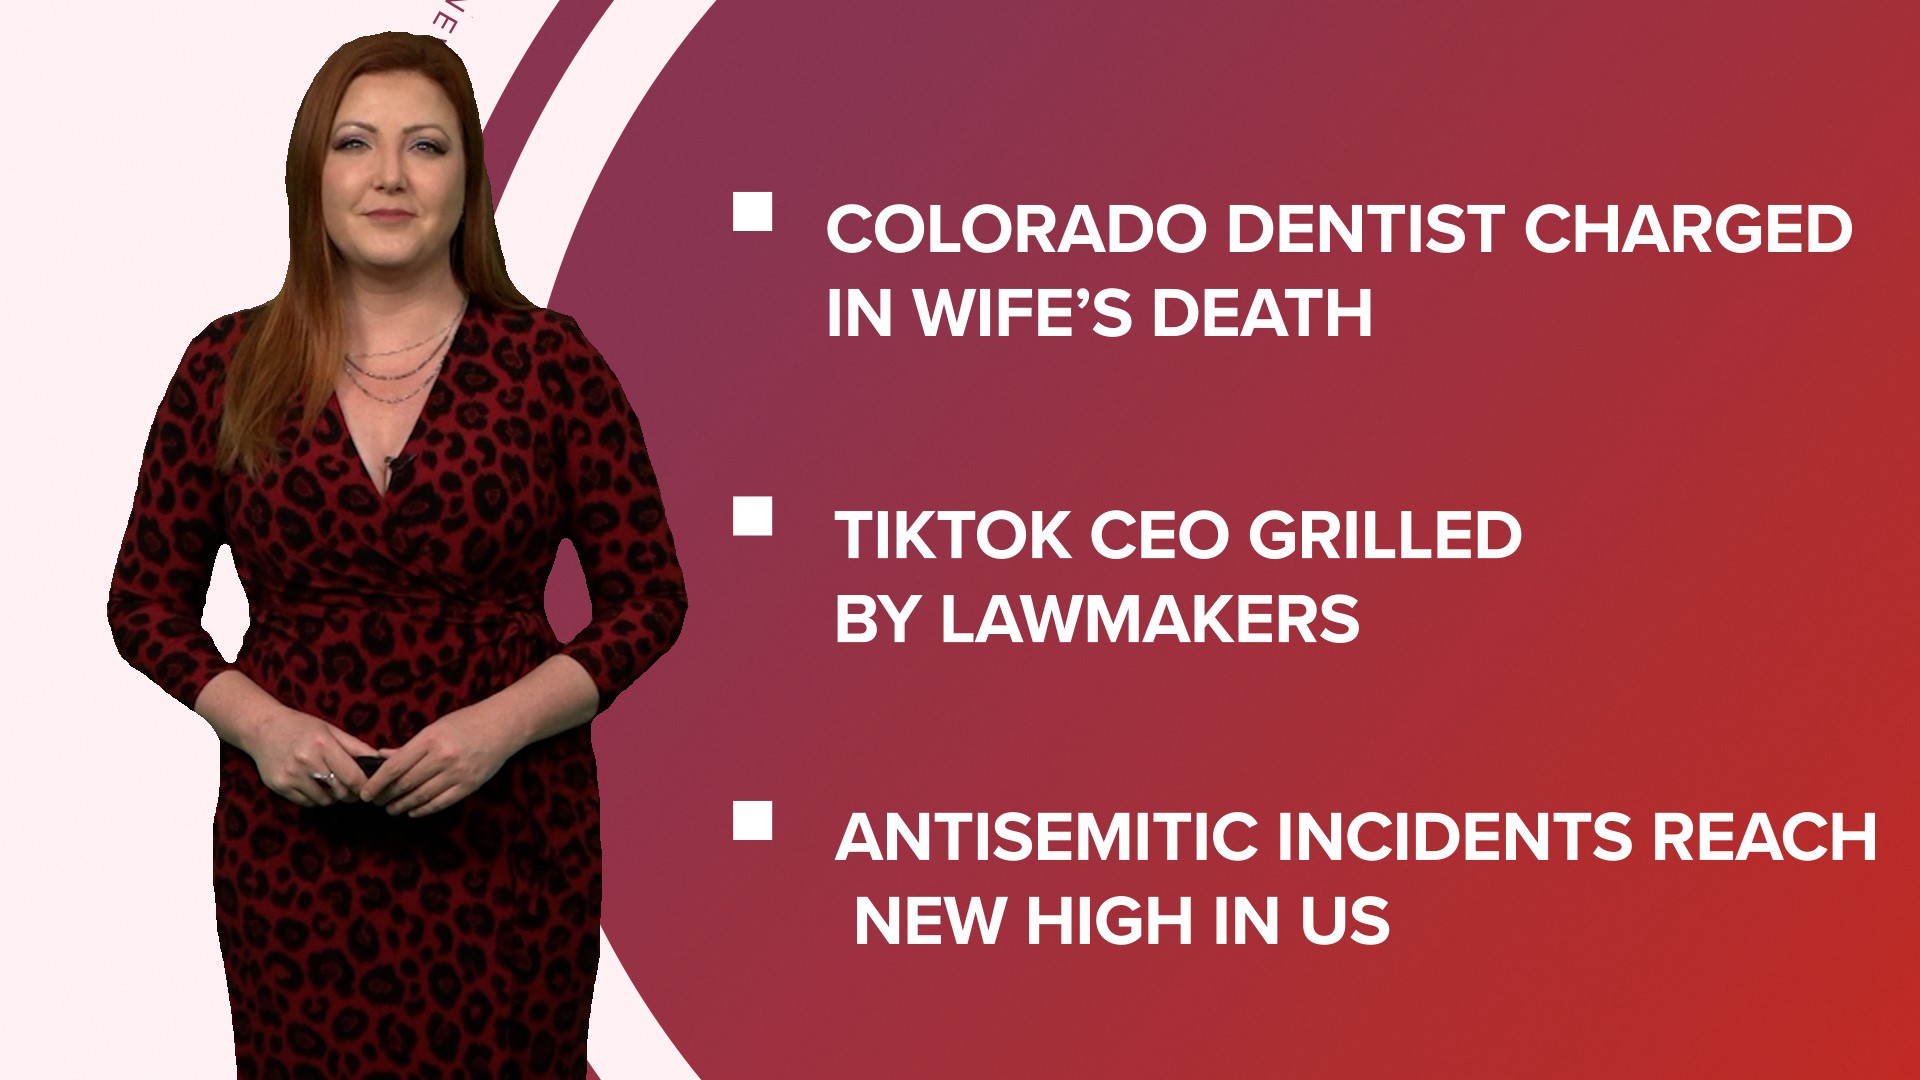 A look at what is happening in the news from a Colorado dentist charged in his wife's death to the CEO of TikTok testifying in front of Congress.